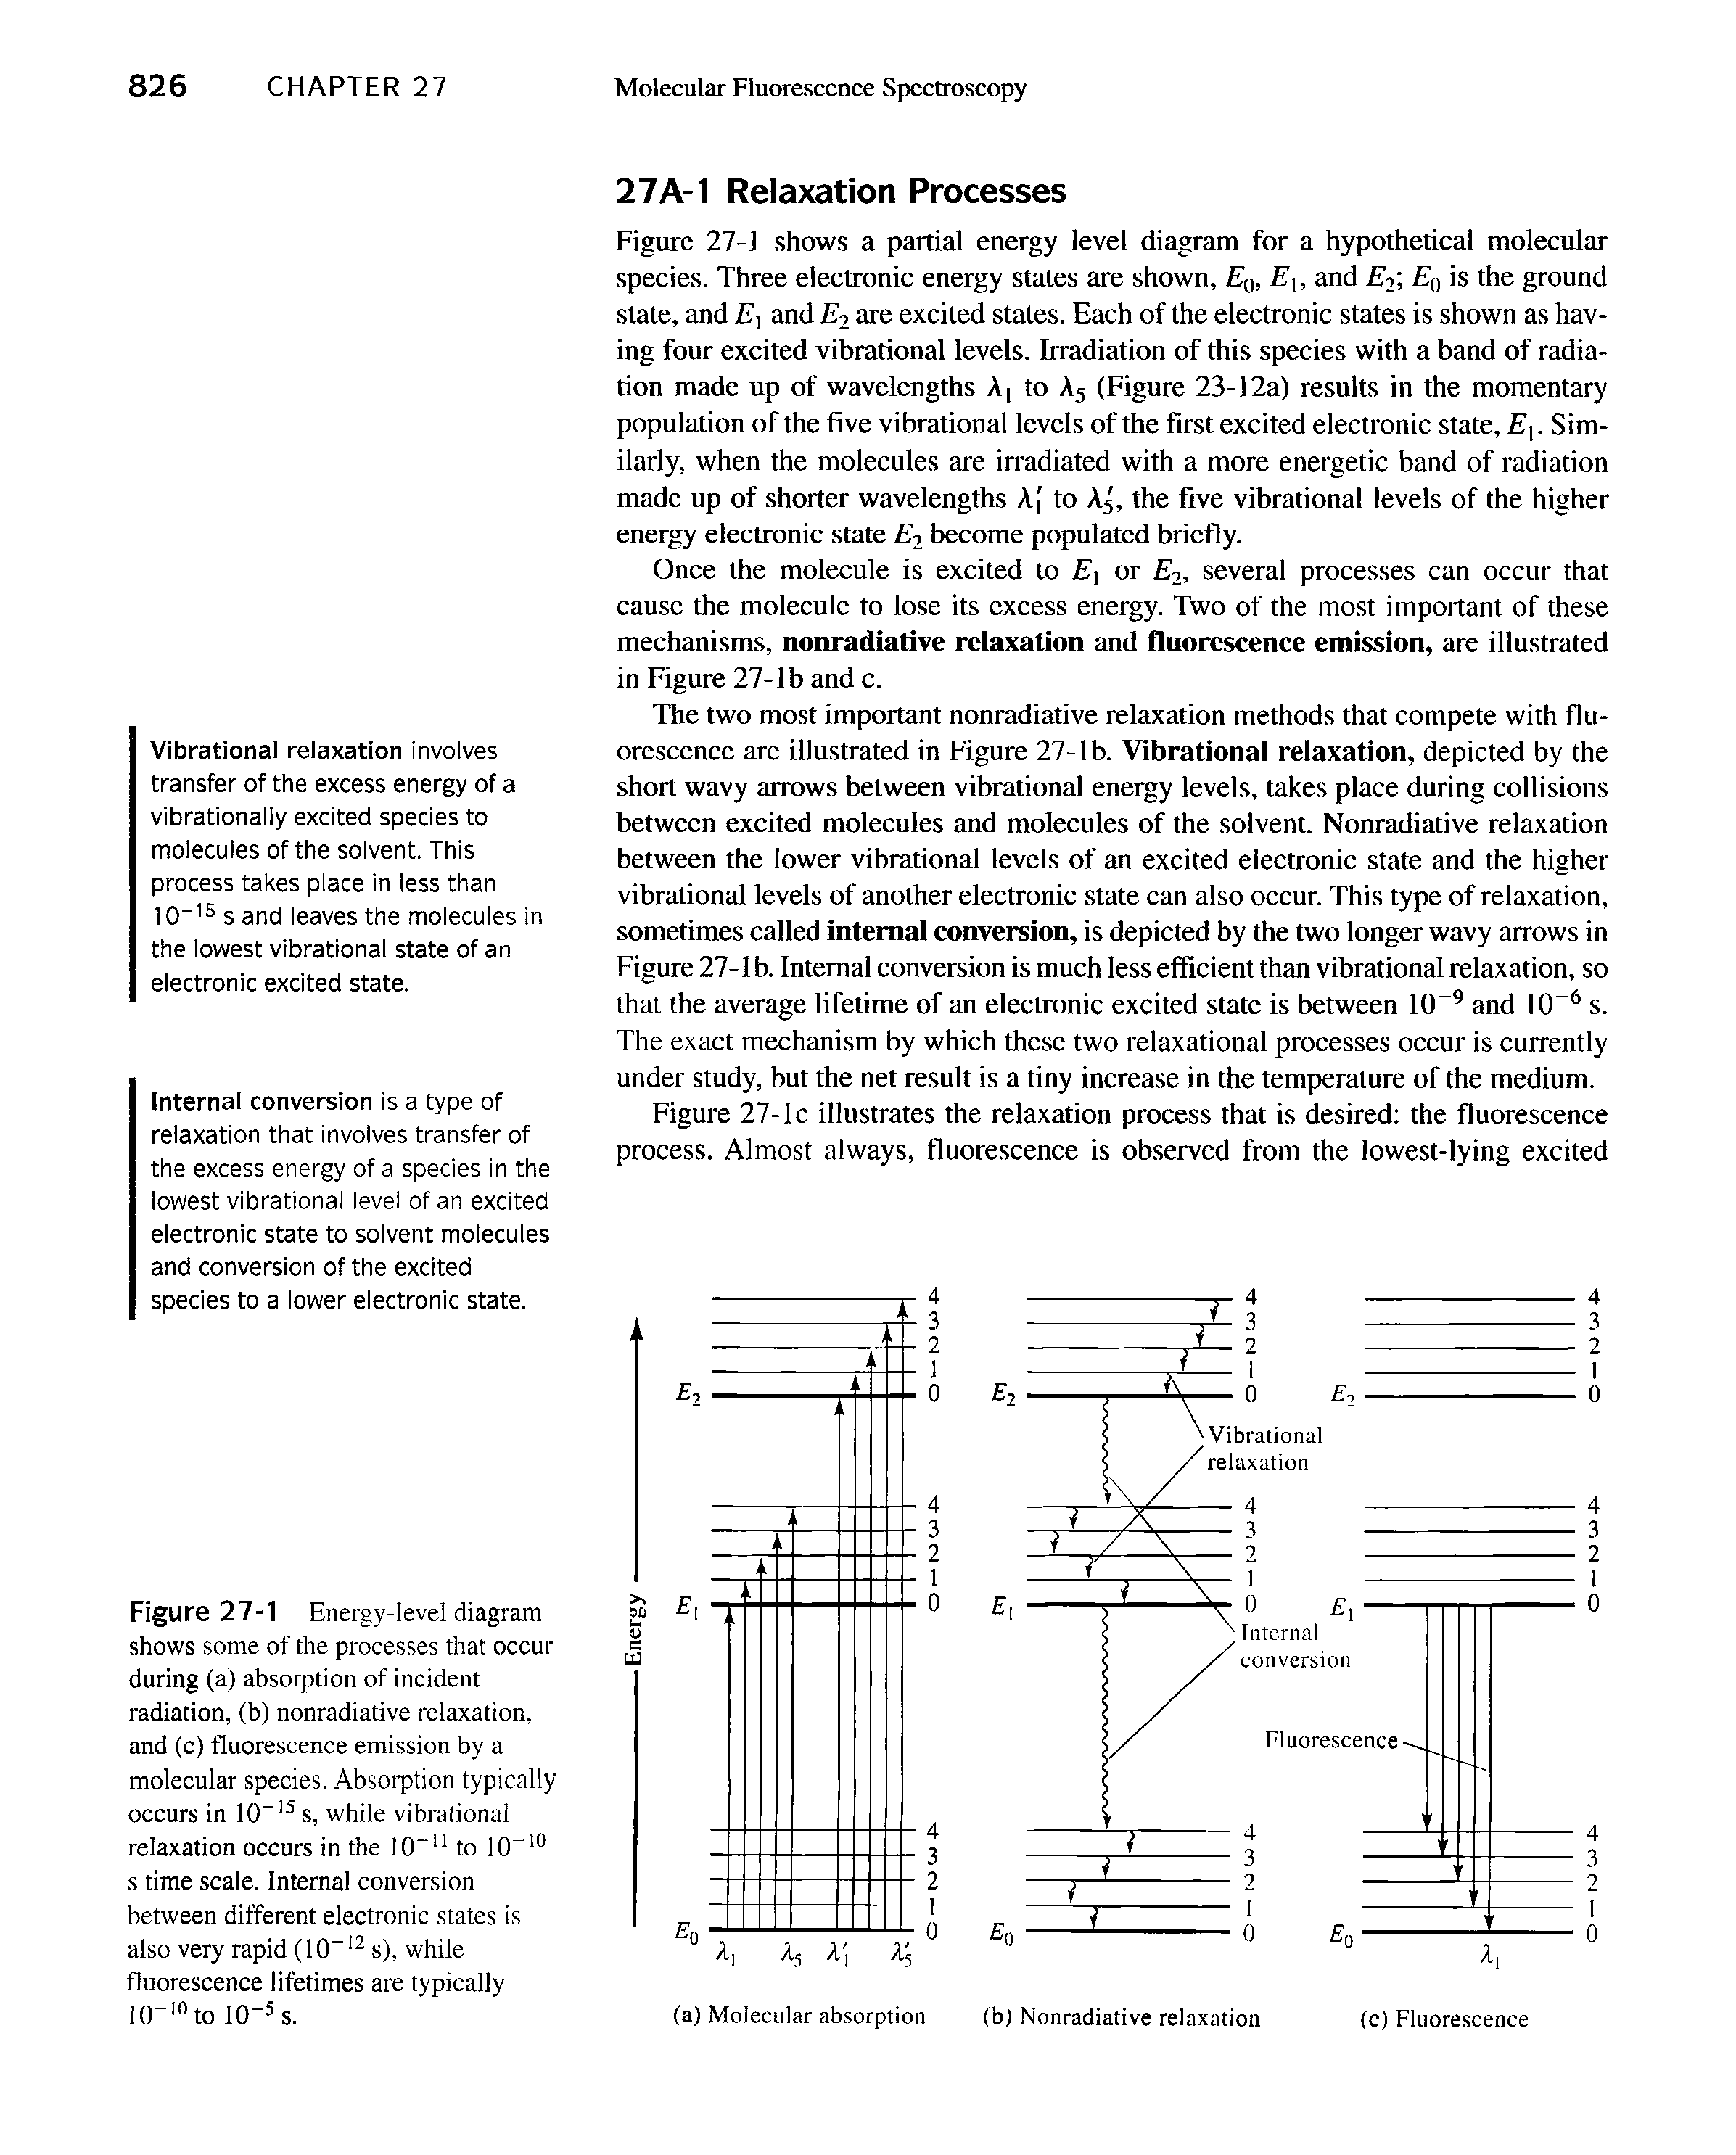 Figure 27-1 Energy-level diagram shows some of the processes that occur during (a) absorption of incident radiation, (b) nonradiative relaxation, and (c) fluorescence emission by a molecular species. Absorption typically occurs in 10 s, while vibrational relaxation occurs in the 10 " to 10 " s time scale. Internal conversion between different electronic states is also very rapid (10 - s), while fluorescence lifetimes are typically lO- to I0 s.